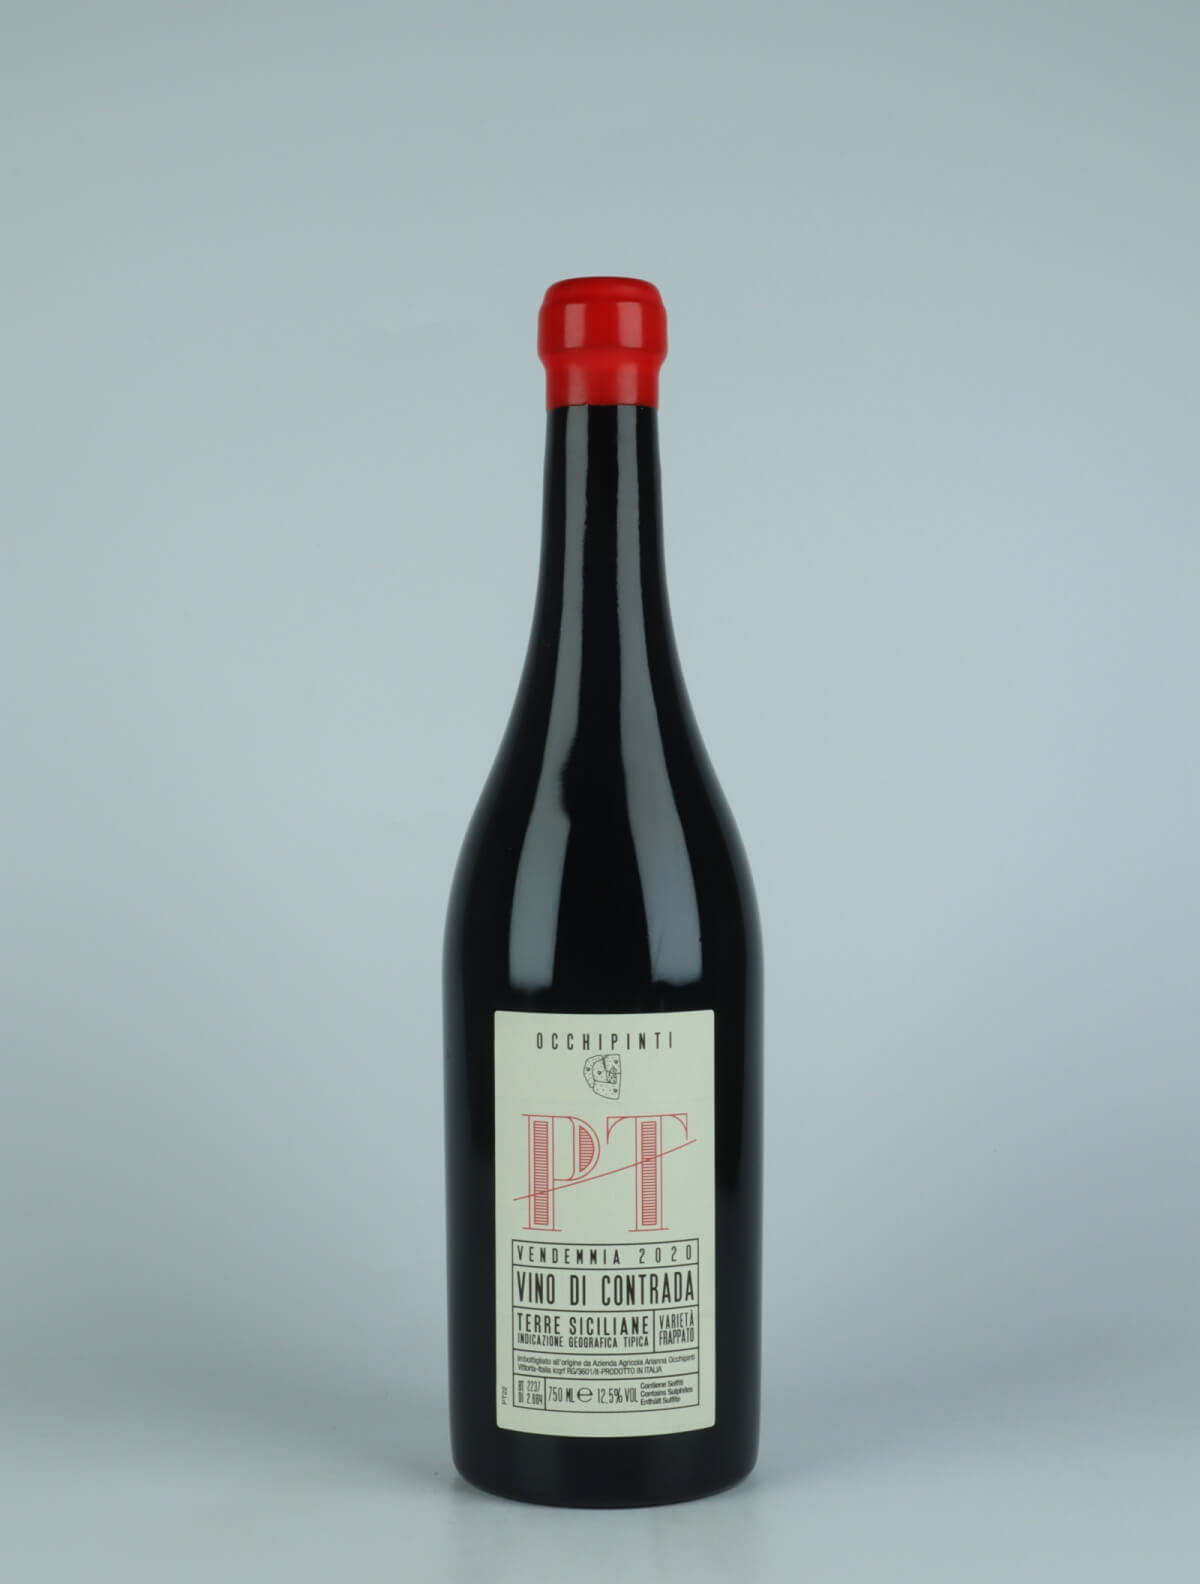 A bottle 2020 Pettineo Red wine from Arianna Occhipinti, Sicily in Italy